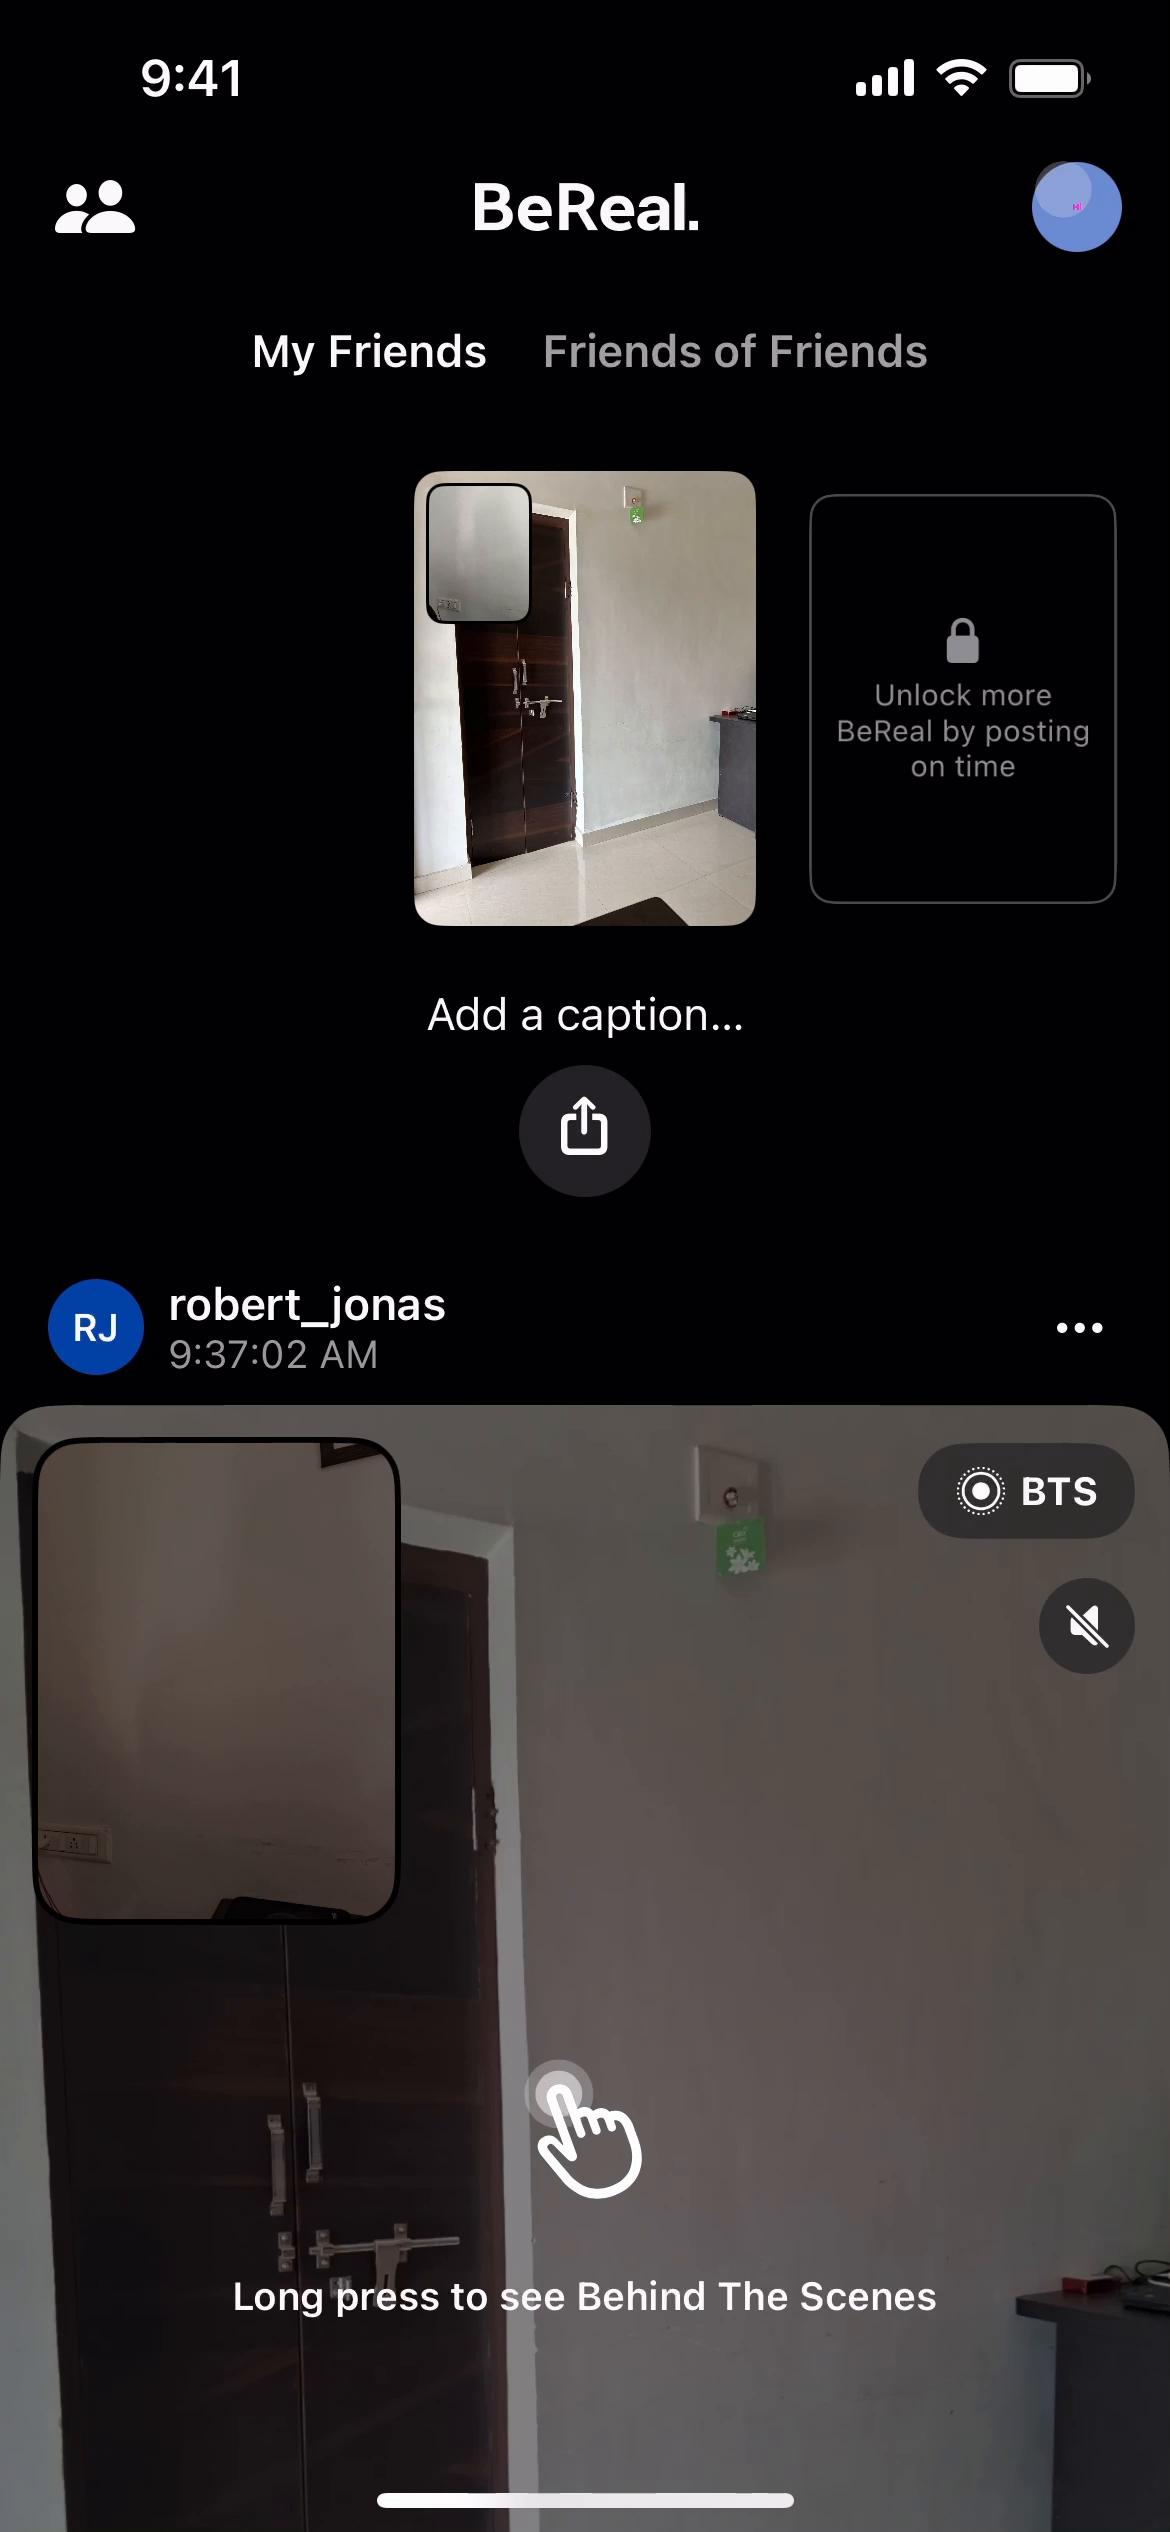 Deleting your account on BeReal. video screenshot